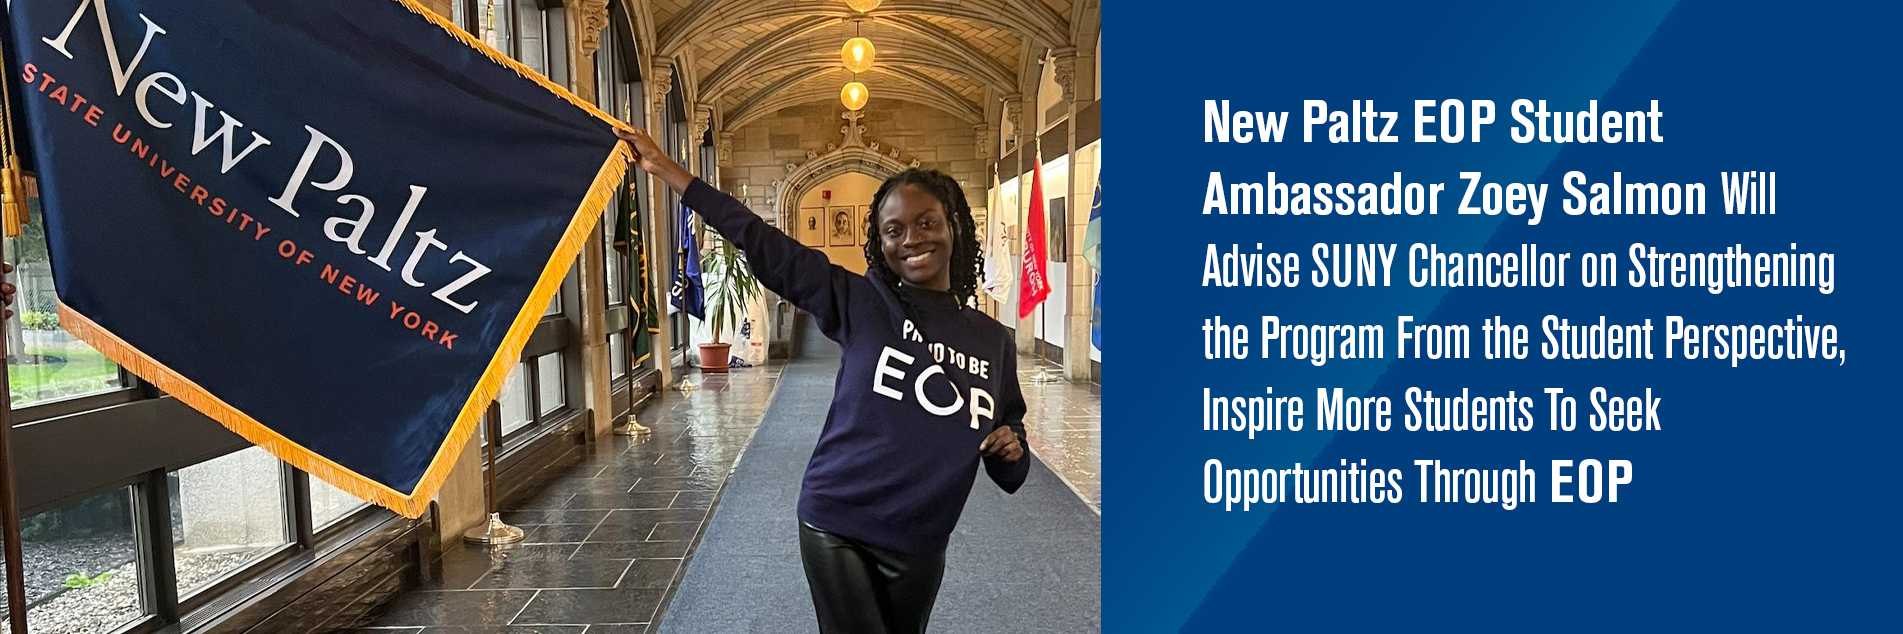 New Paltz EOP Student Ambassador Zoey Salomon Will Advise SUNY Chancellor on Strengthening the Program From the Student Perspective, Inspire More Students To Seek Opportunities Through EOP